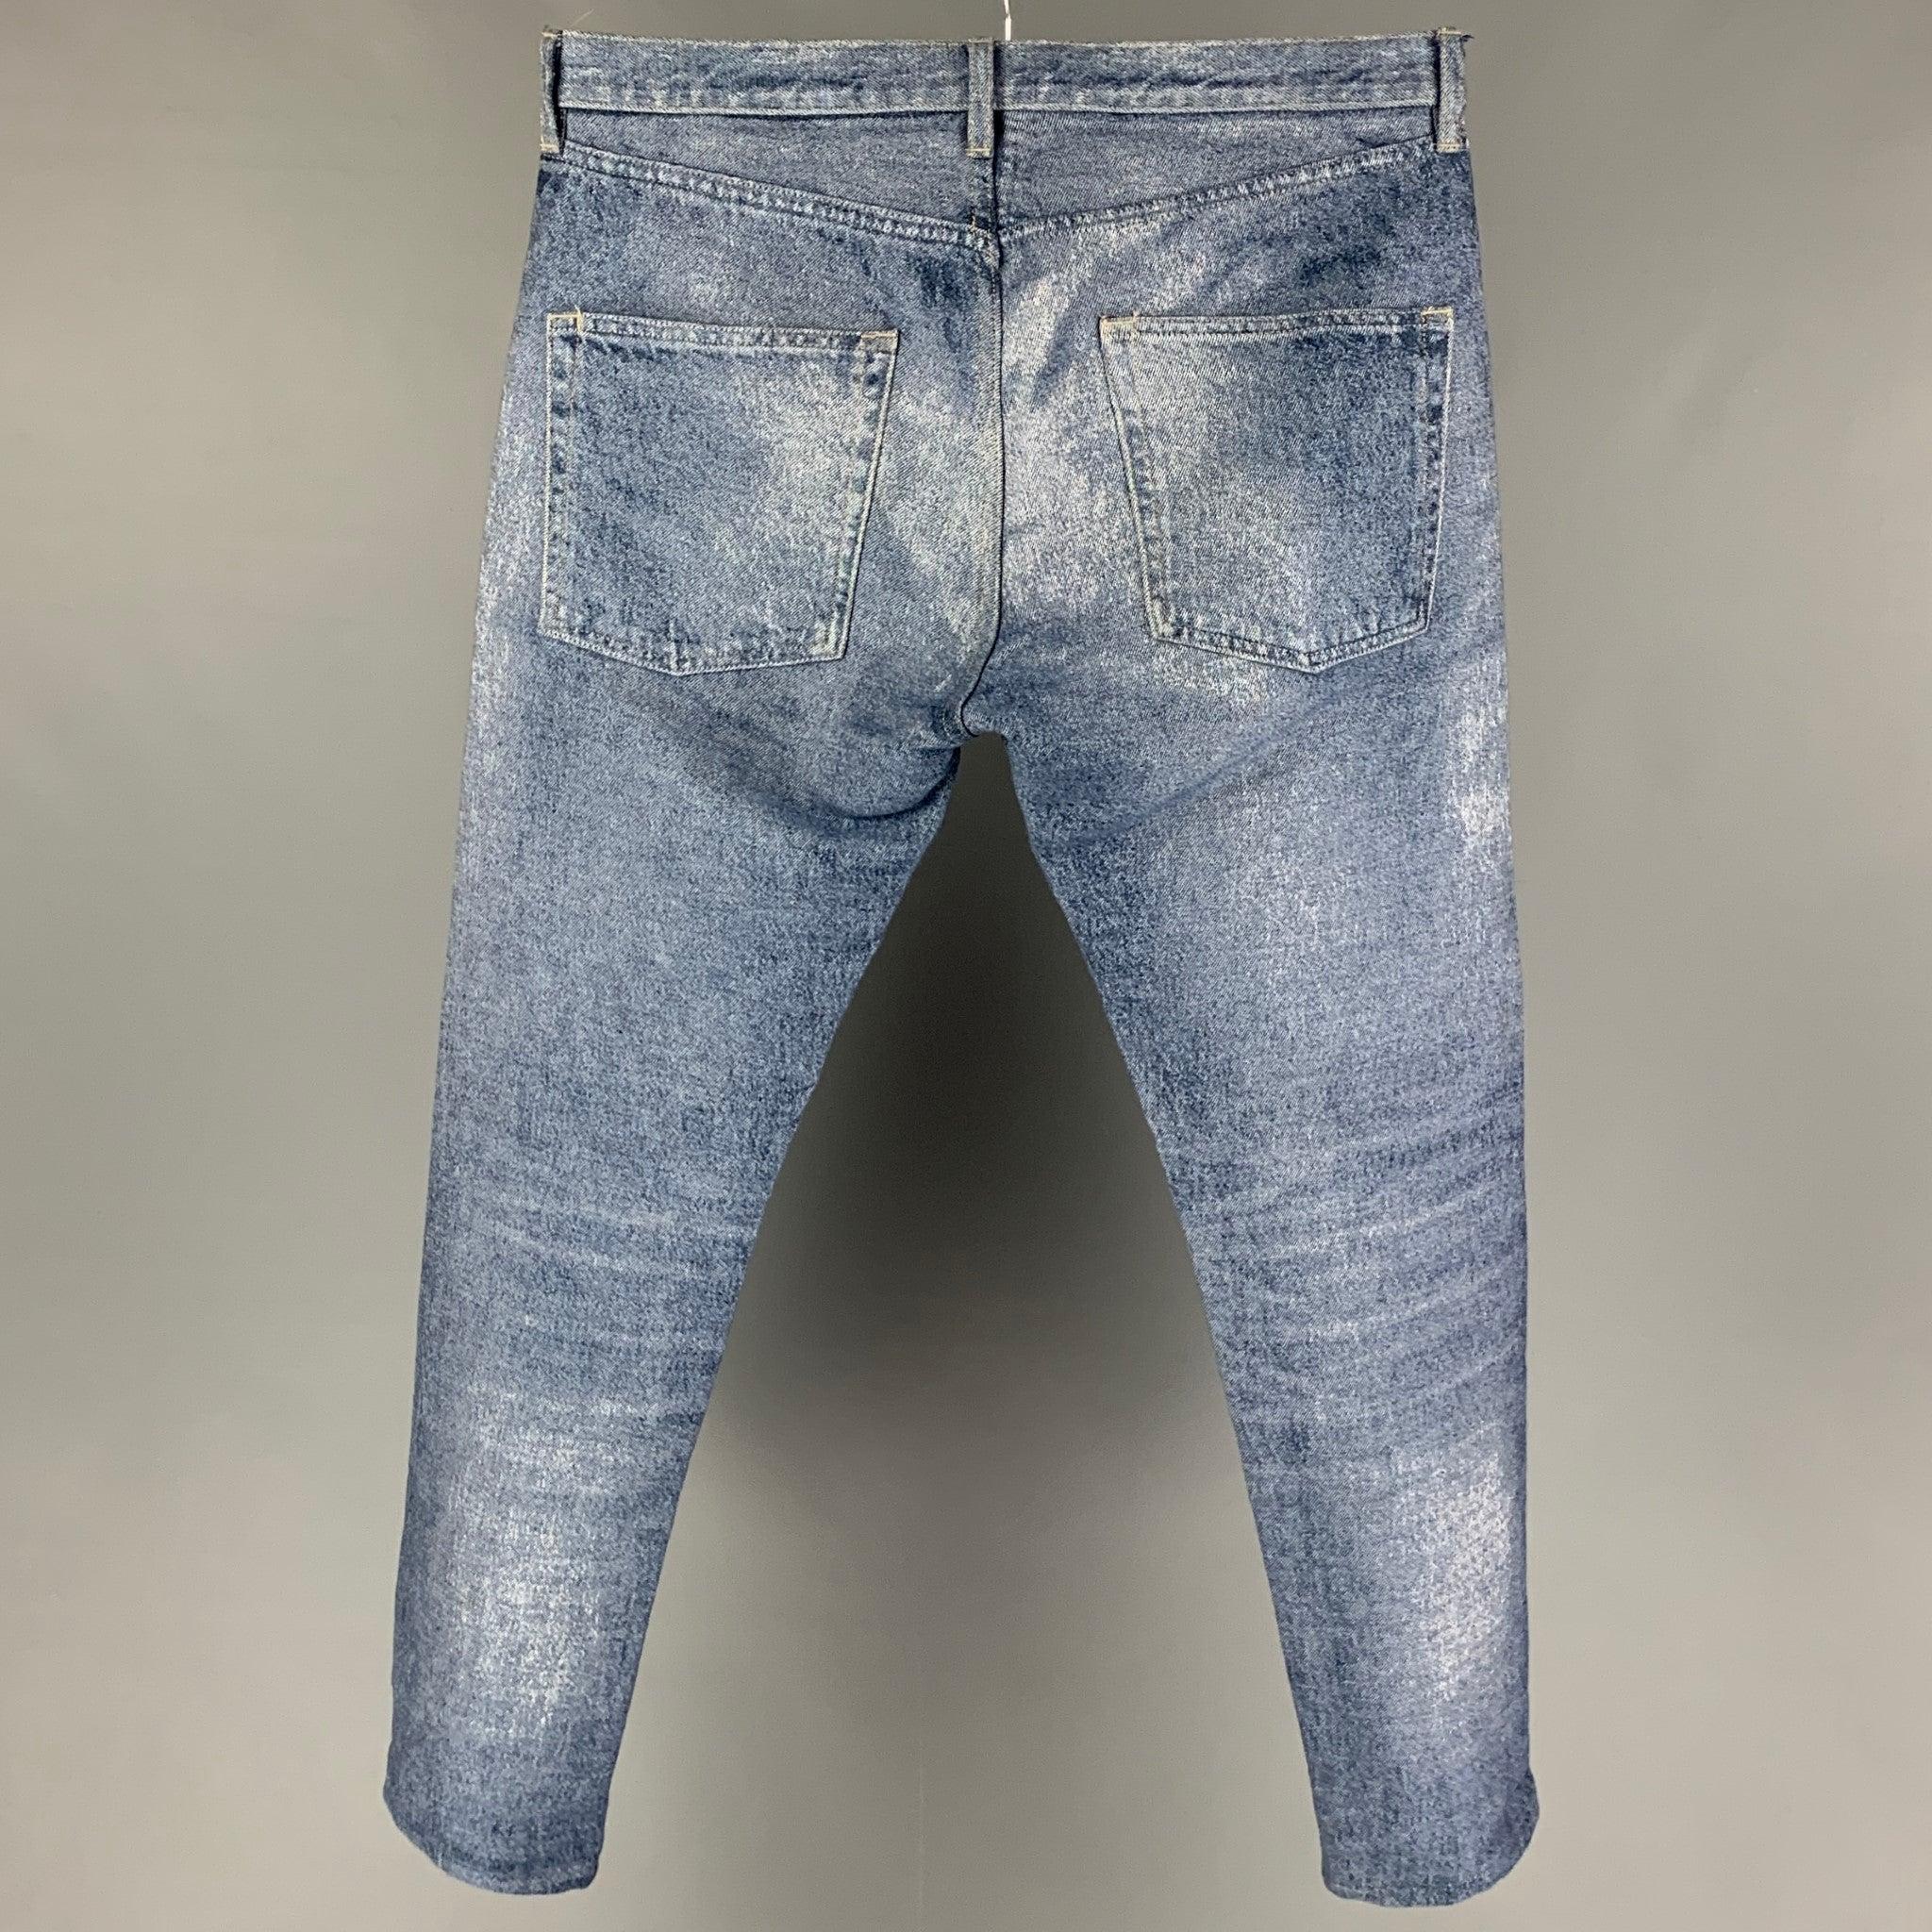 CALVIN KLEIN jeans comes in a light blue washed cotton featuring a slim fit, contrast stitching, and a zip fly closure.
Very Good
Pre-Owned Condition. 

Marked:   48/32 

Measurements: 
  Waist: 34 inches  Rise: 11 inches  Inseam: 31 inches 
  
  
